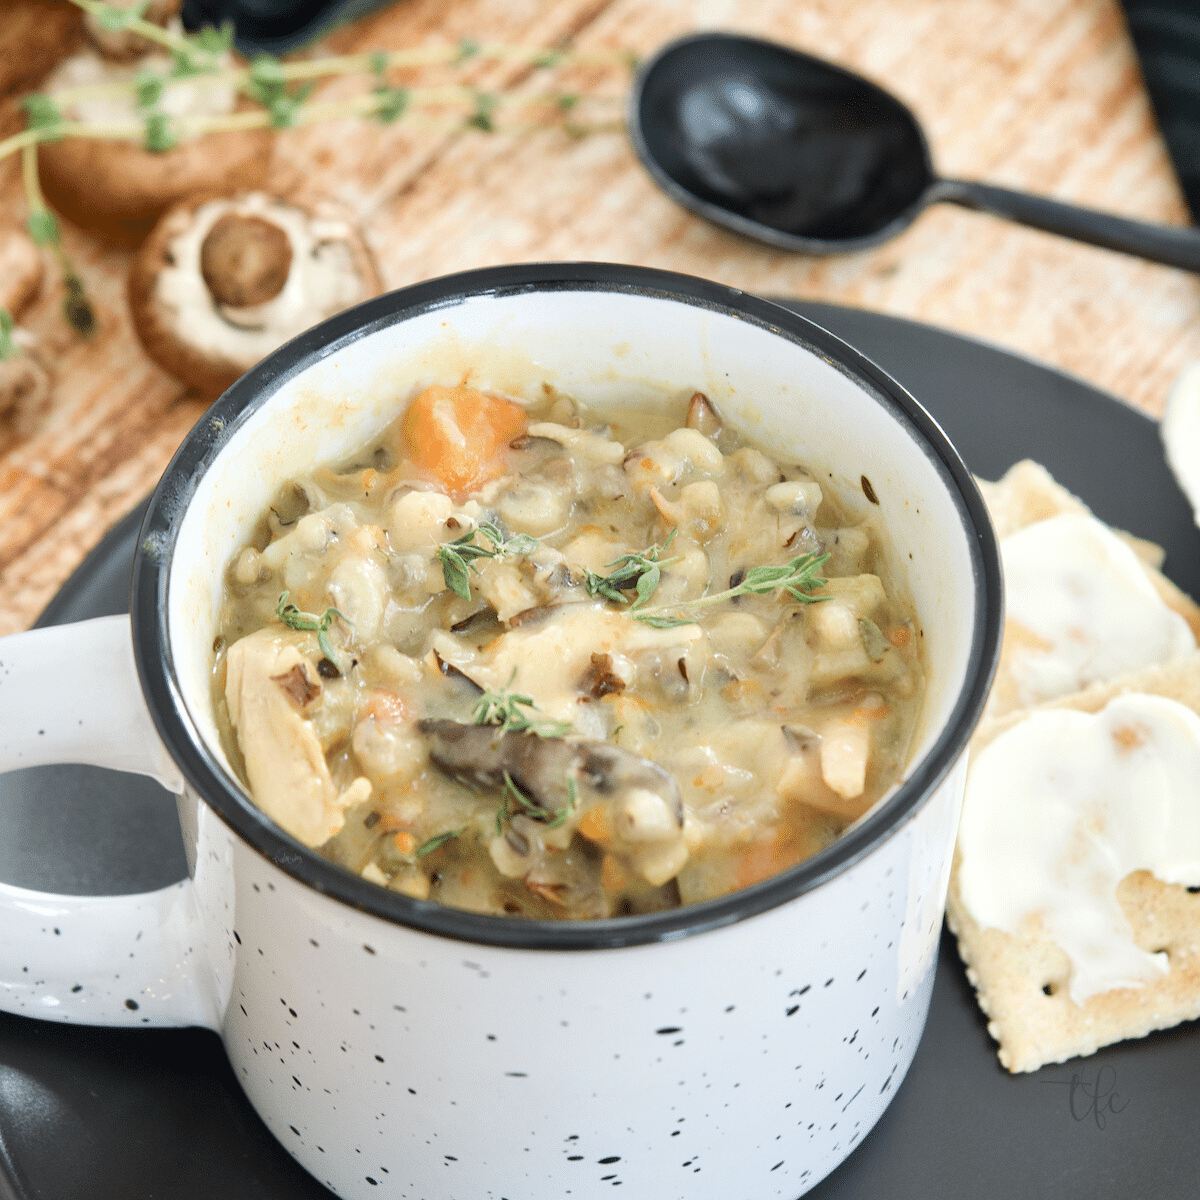 https://www.thefreshcooky.com/wp-content/uploads/2021/11/Creamy-Mushroom-Soup-Instant-Pot-Square-image.png